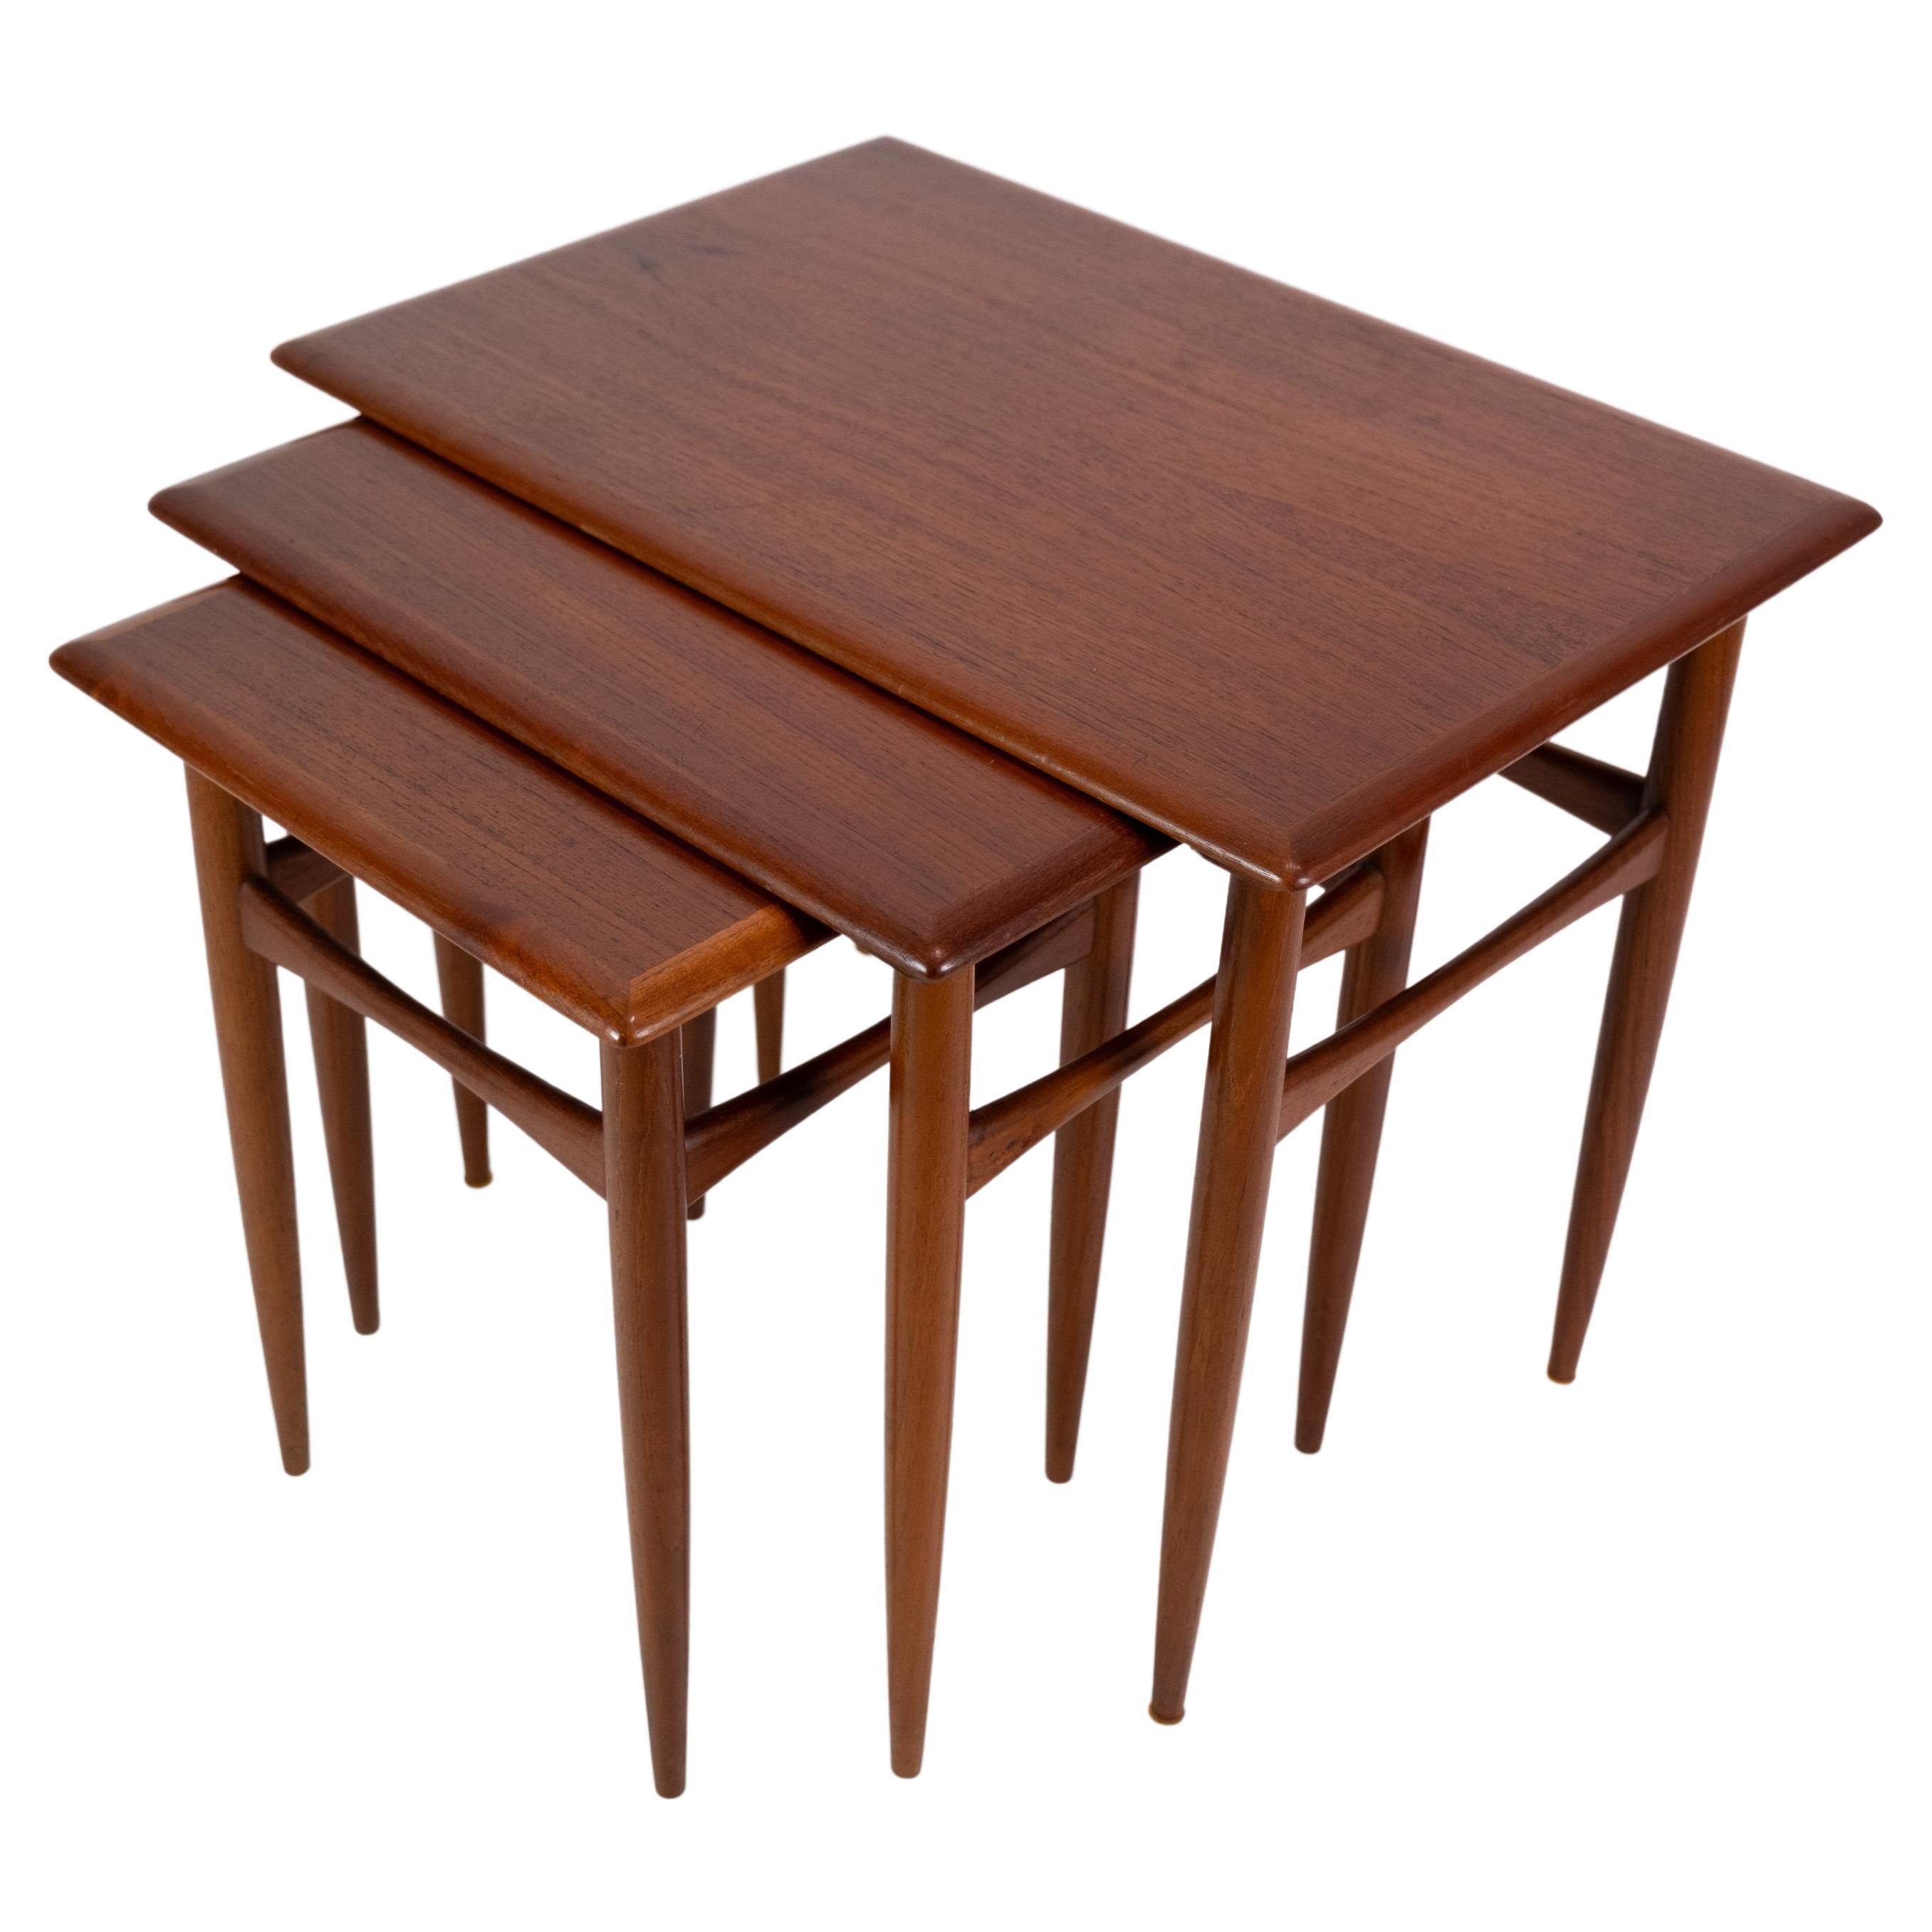 Nesting Tables / Stacking Tables of Danish Design in Teak Wood From The 1960's 